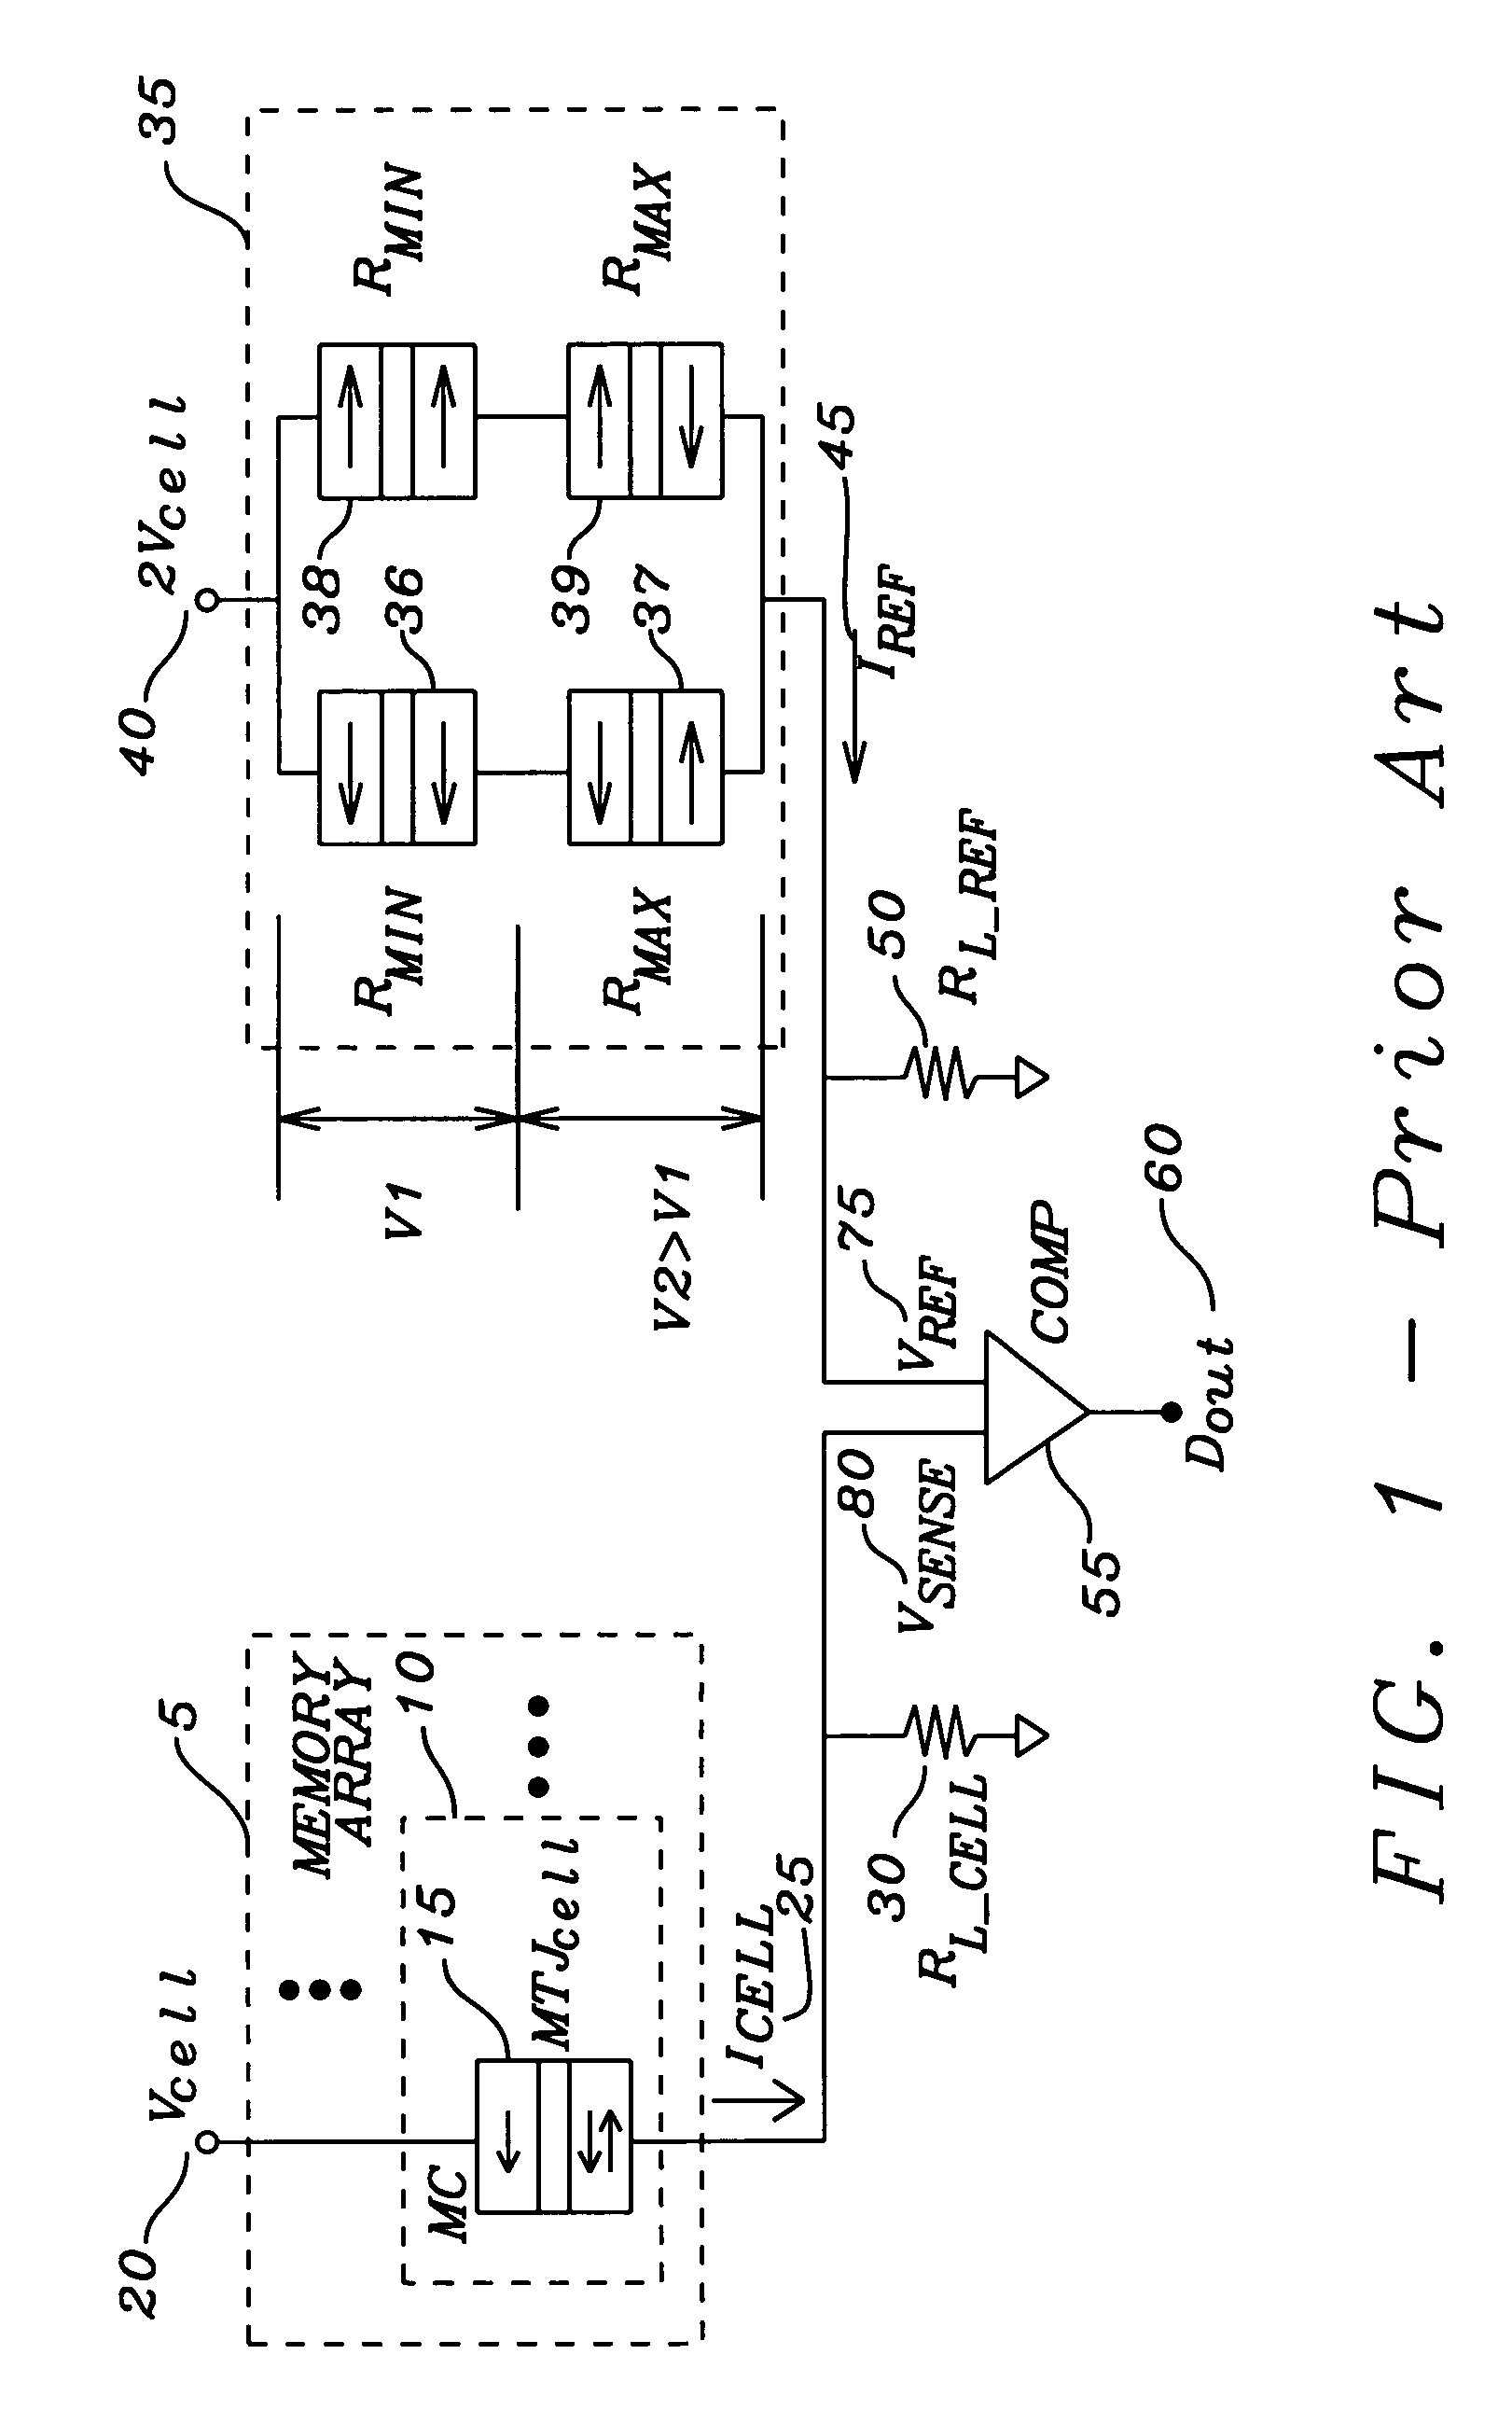 Reference generator for multilevel nonlinear resistivity memory storage elements